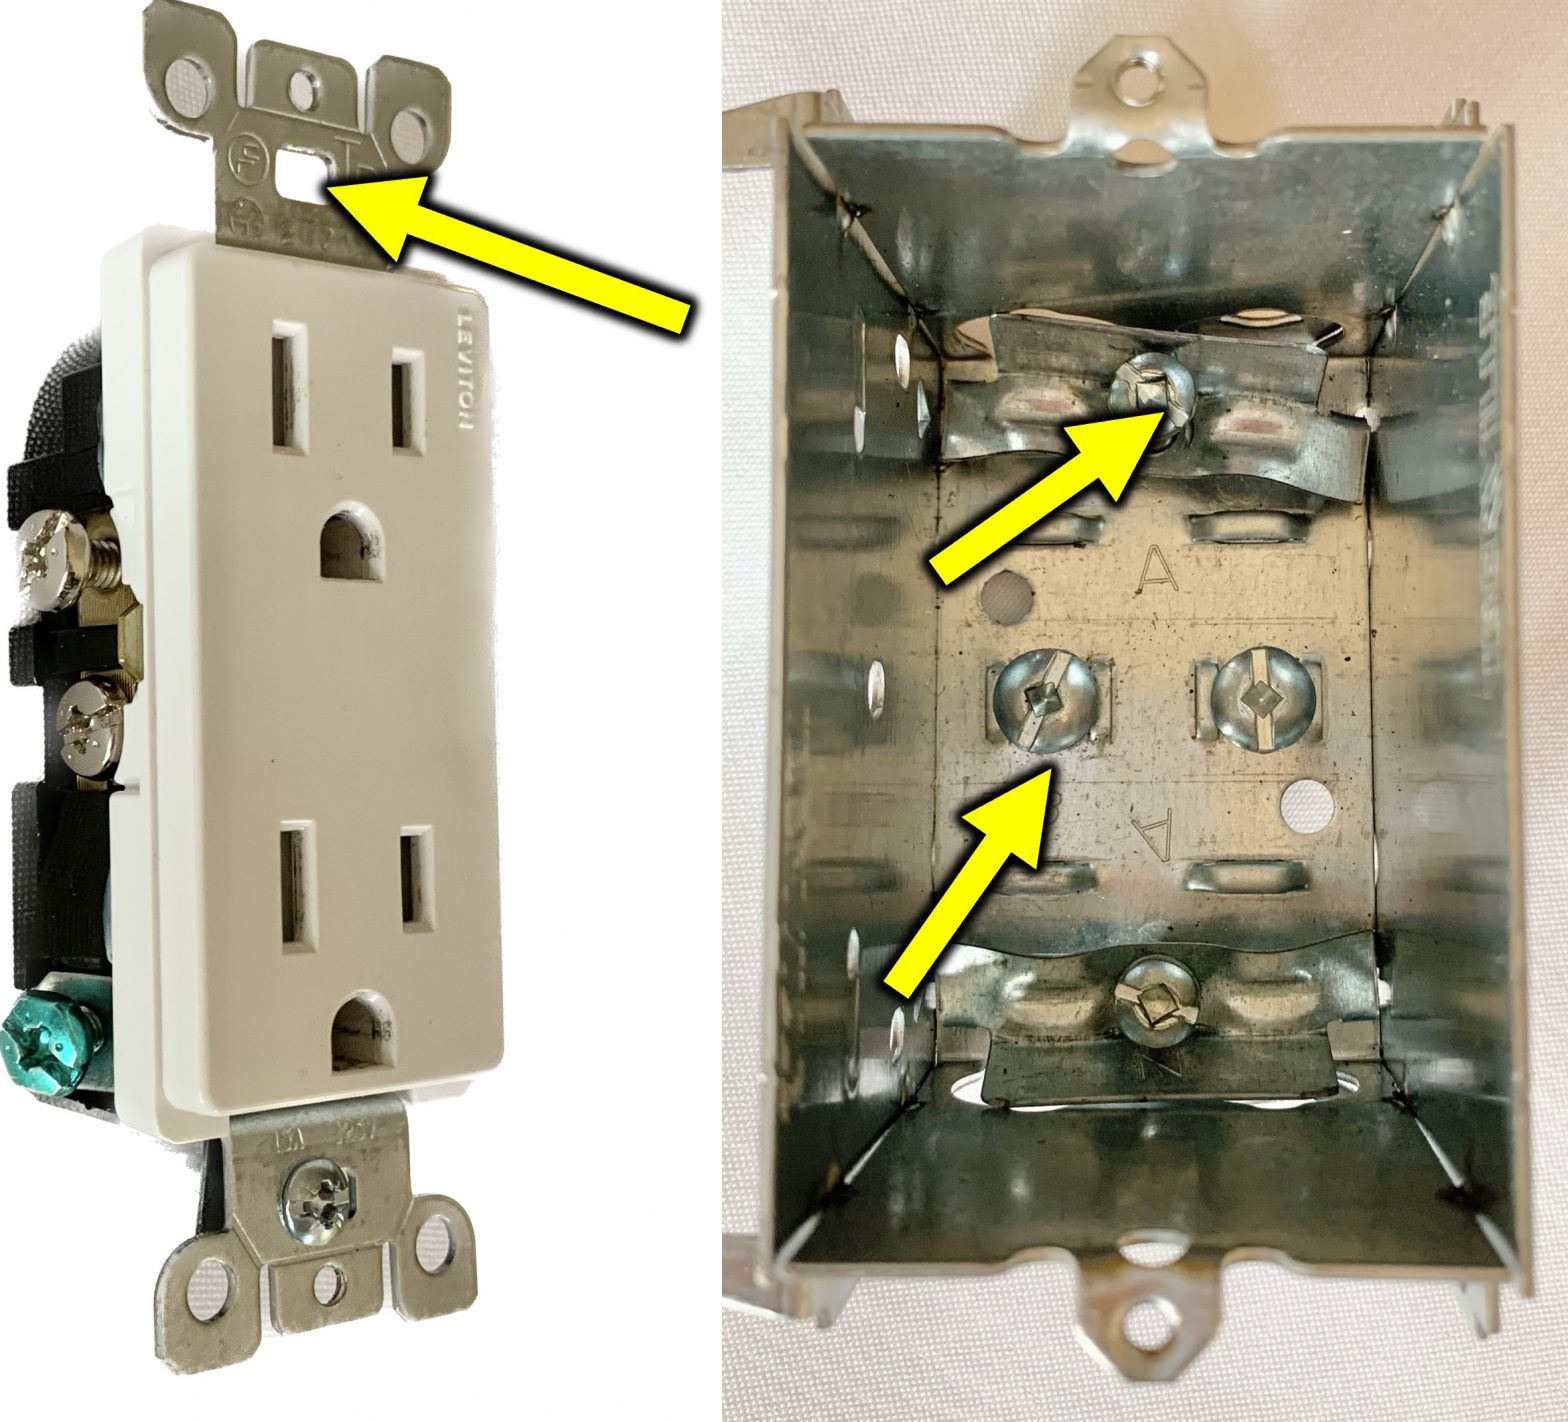 Correct Replacement / Longer Screw for an Electrical Outlet, Switch or Box